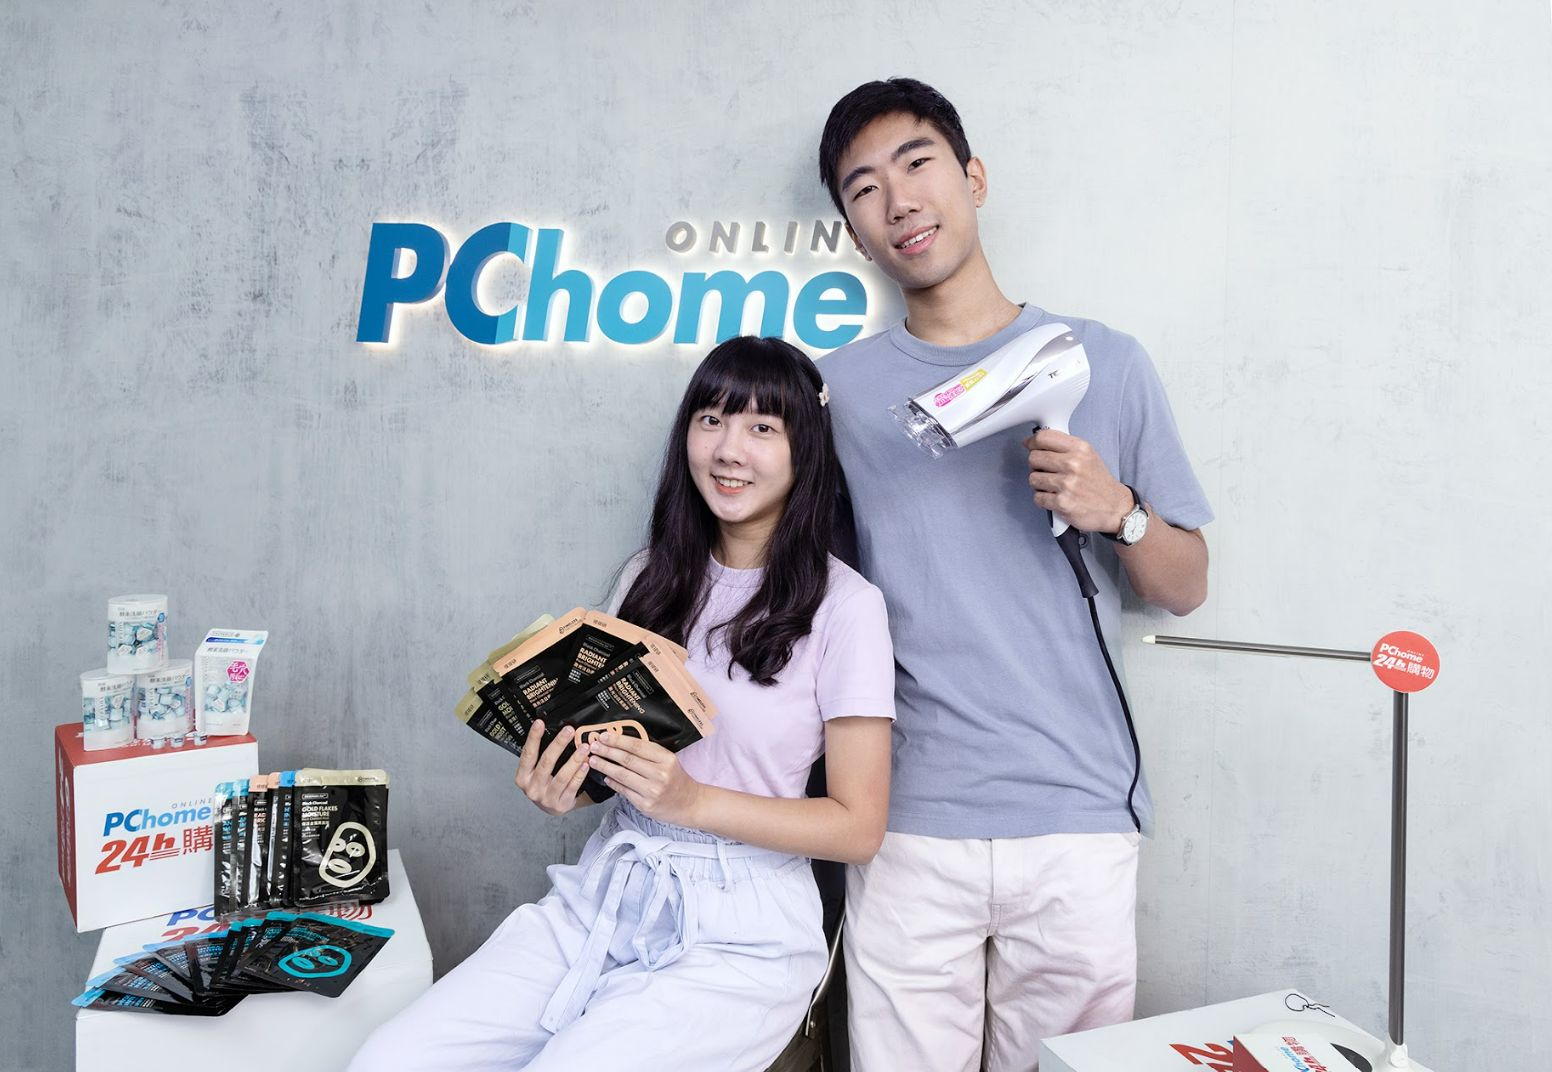 PChome Is Absolutely the Best Option for 3C Shoppers! PChome 24h Shopping Offers up to 75% off Discount for the New Semester Season